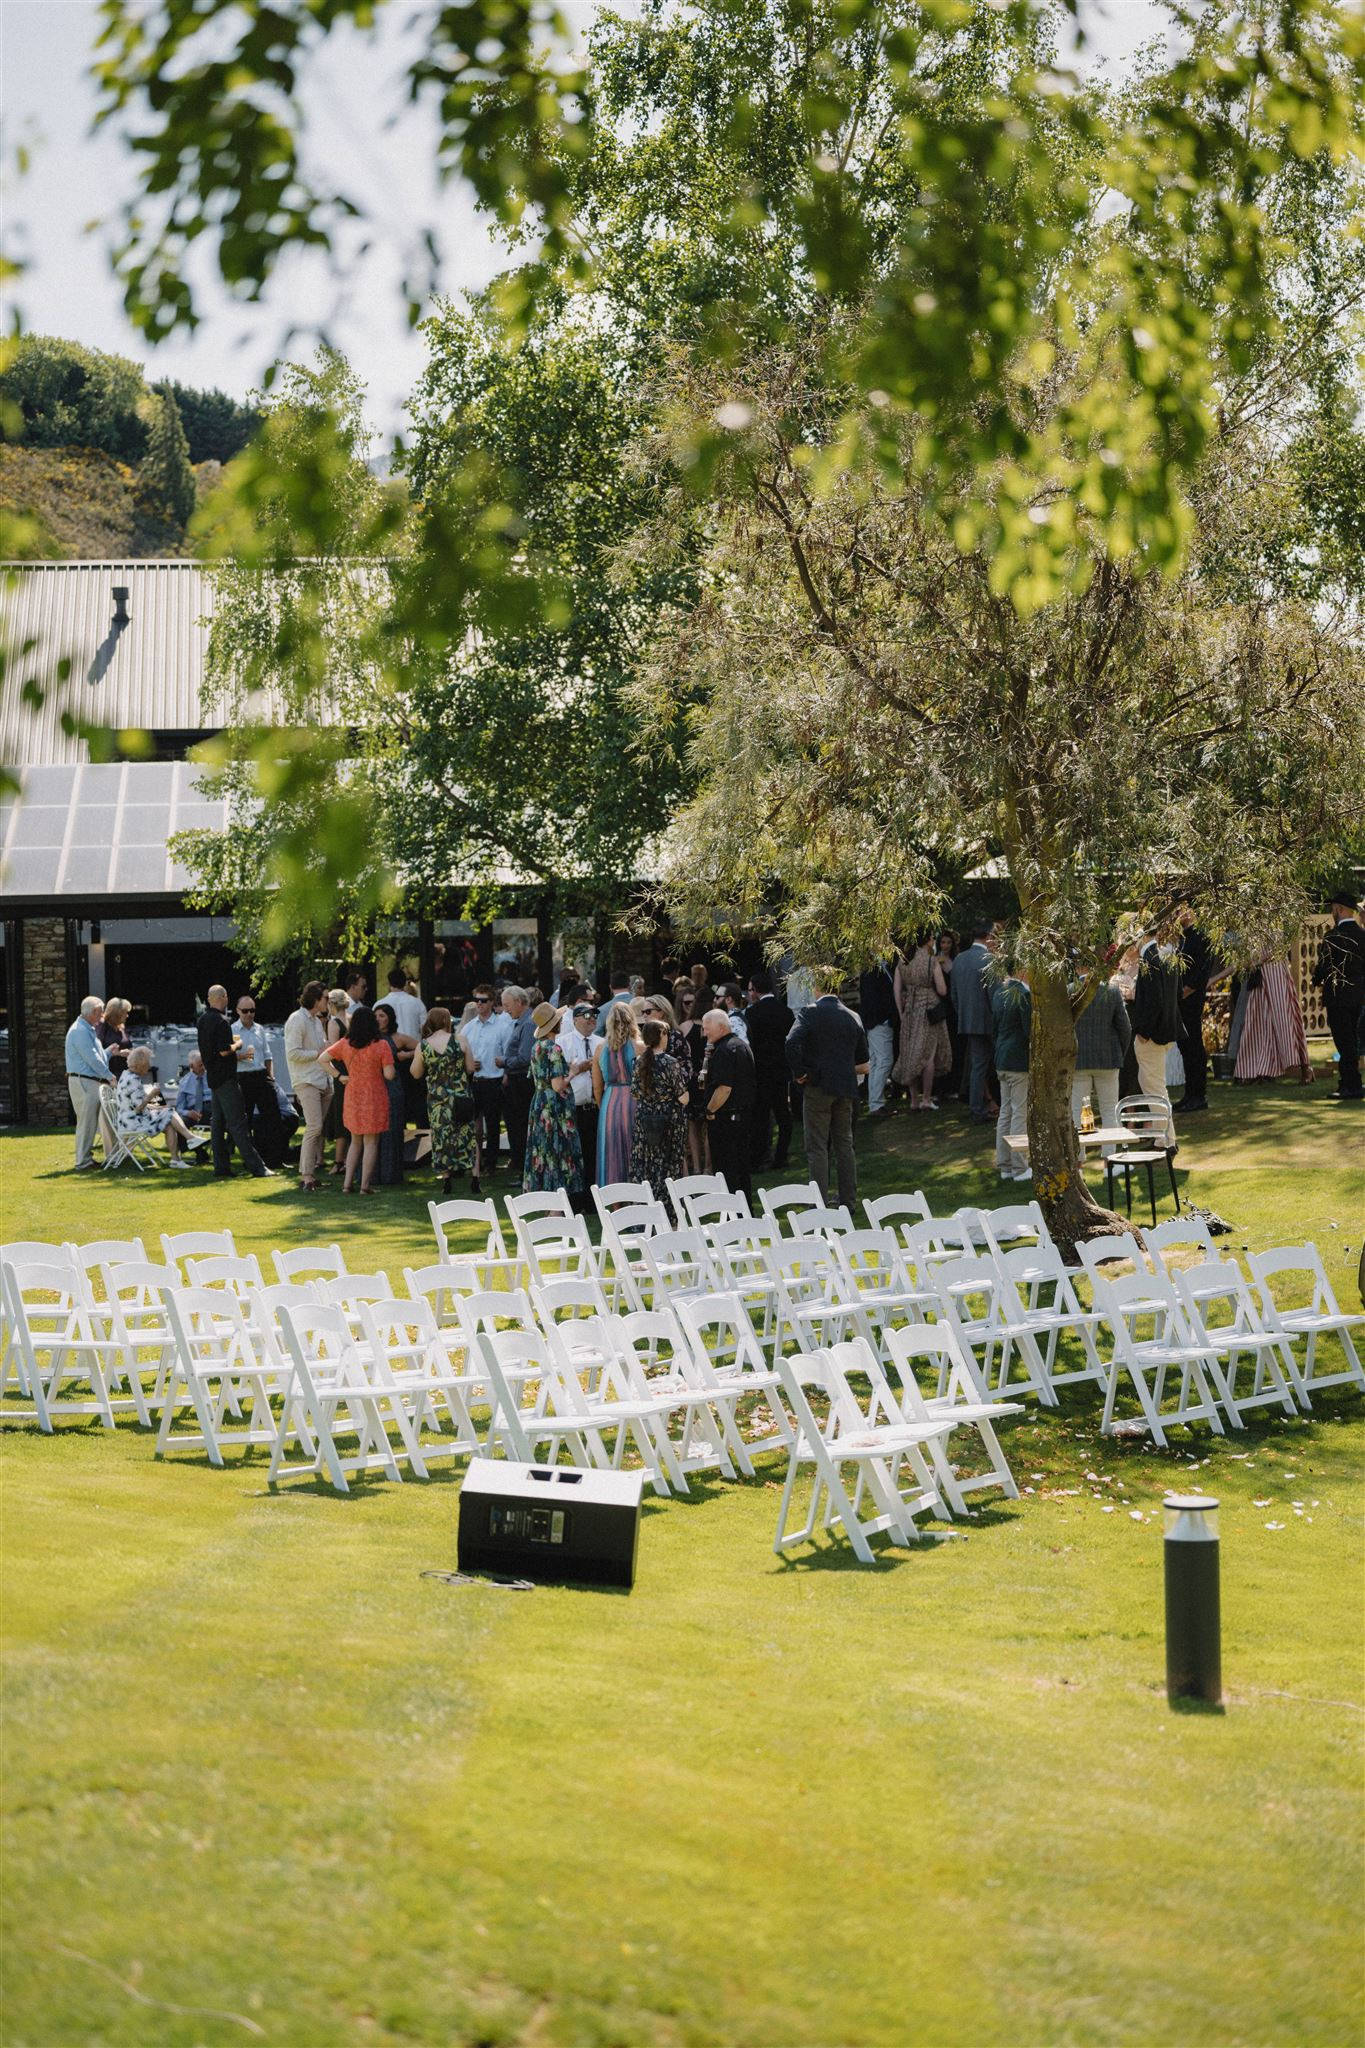 Edgewater's new zealand wedding packages include  up to 40 white chairs, set up on these rolling green lawns outside of the pavilion